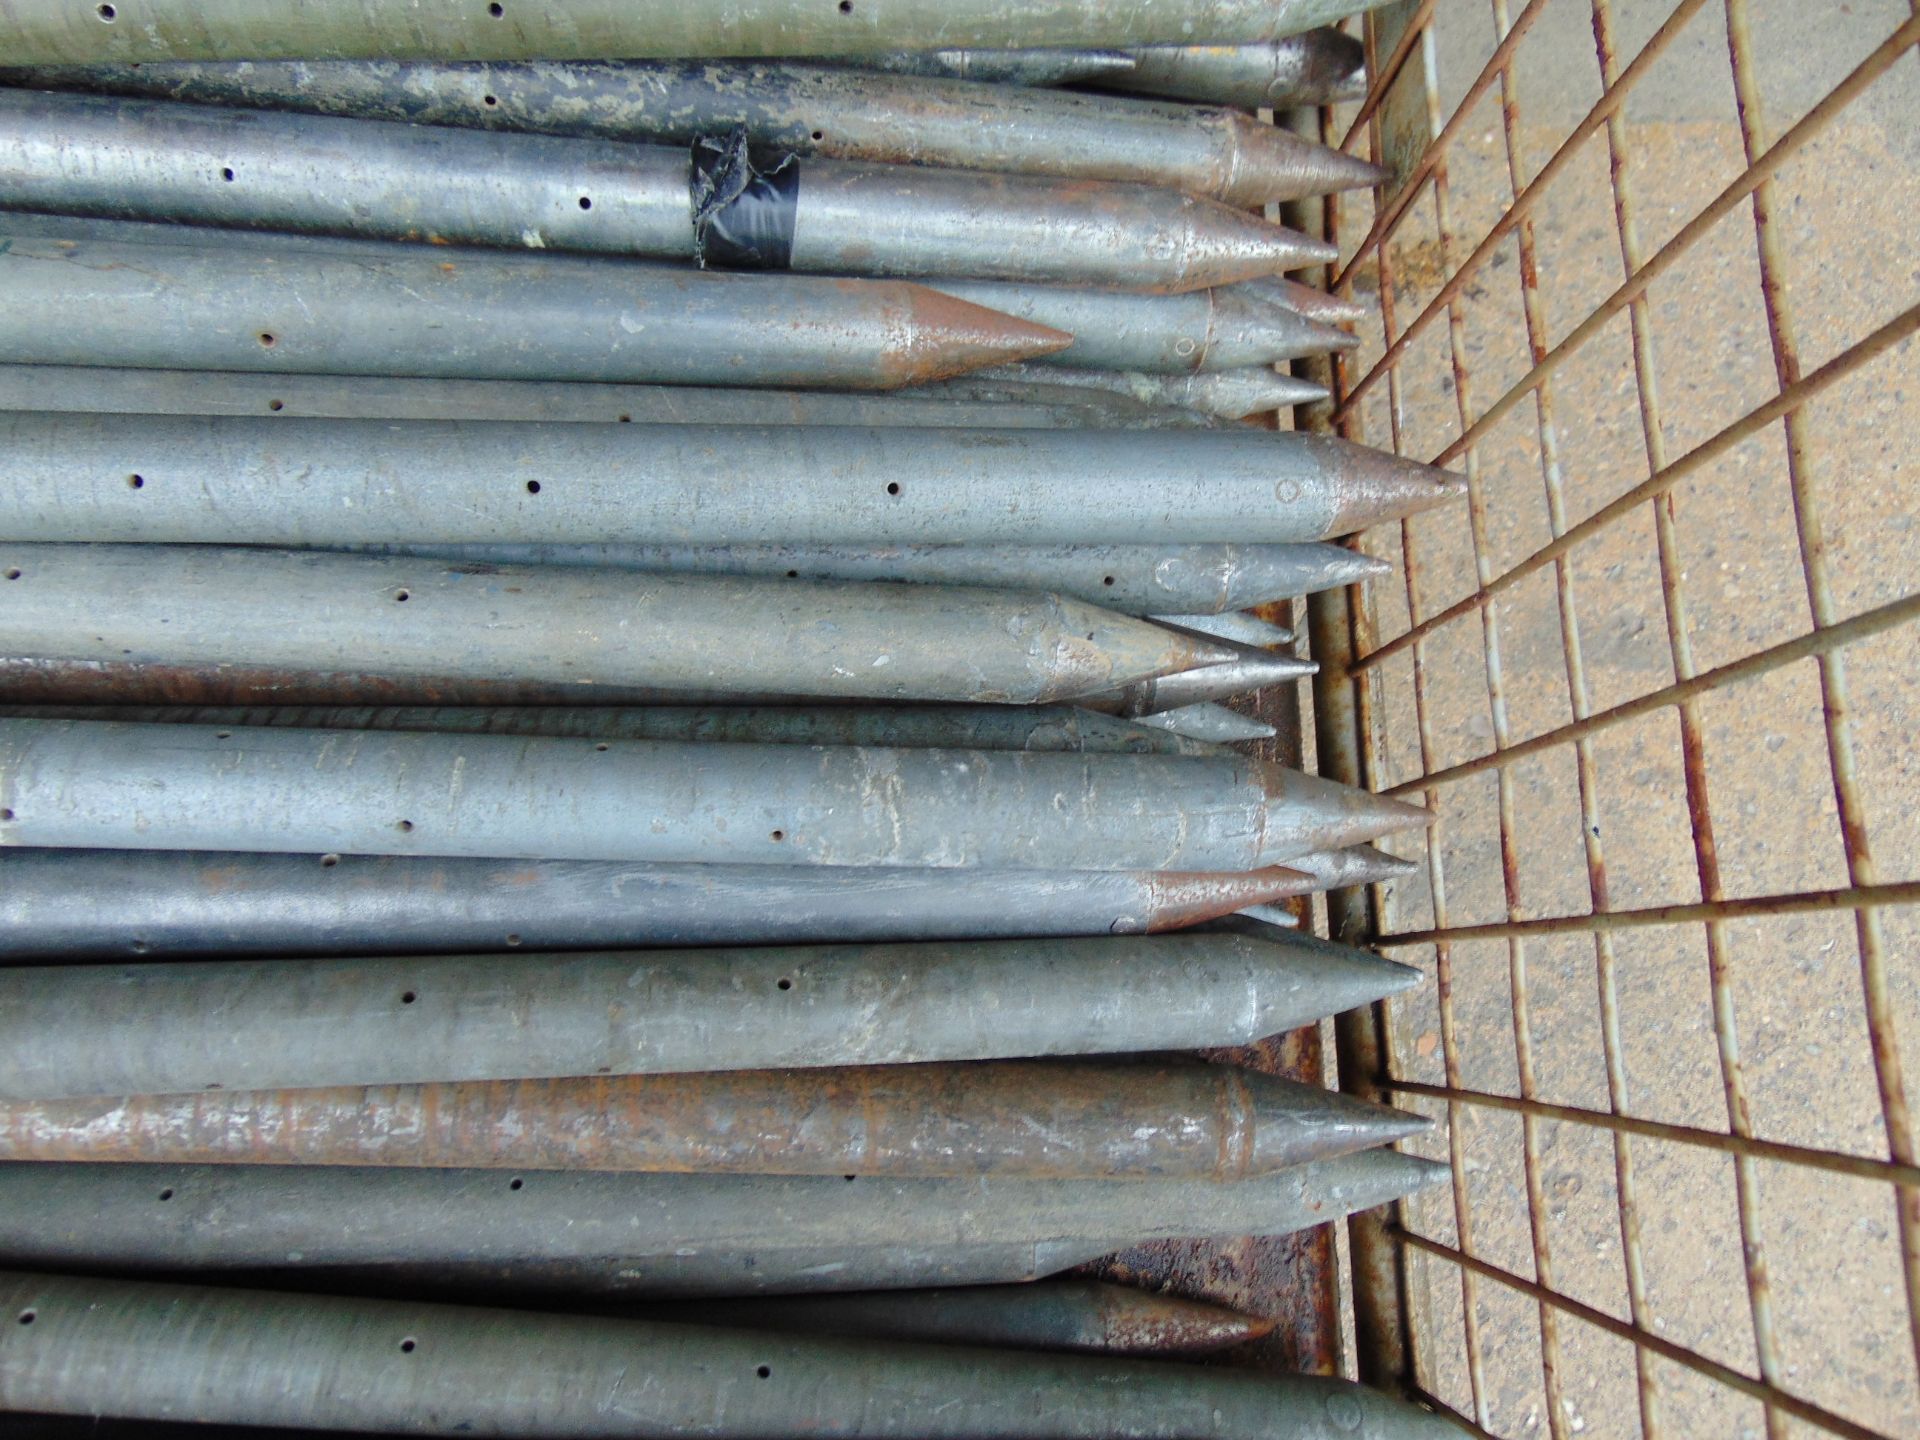 64 x 3ft Galvanised Earth Spikes - Image 6 of 7